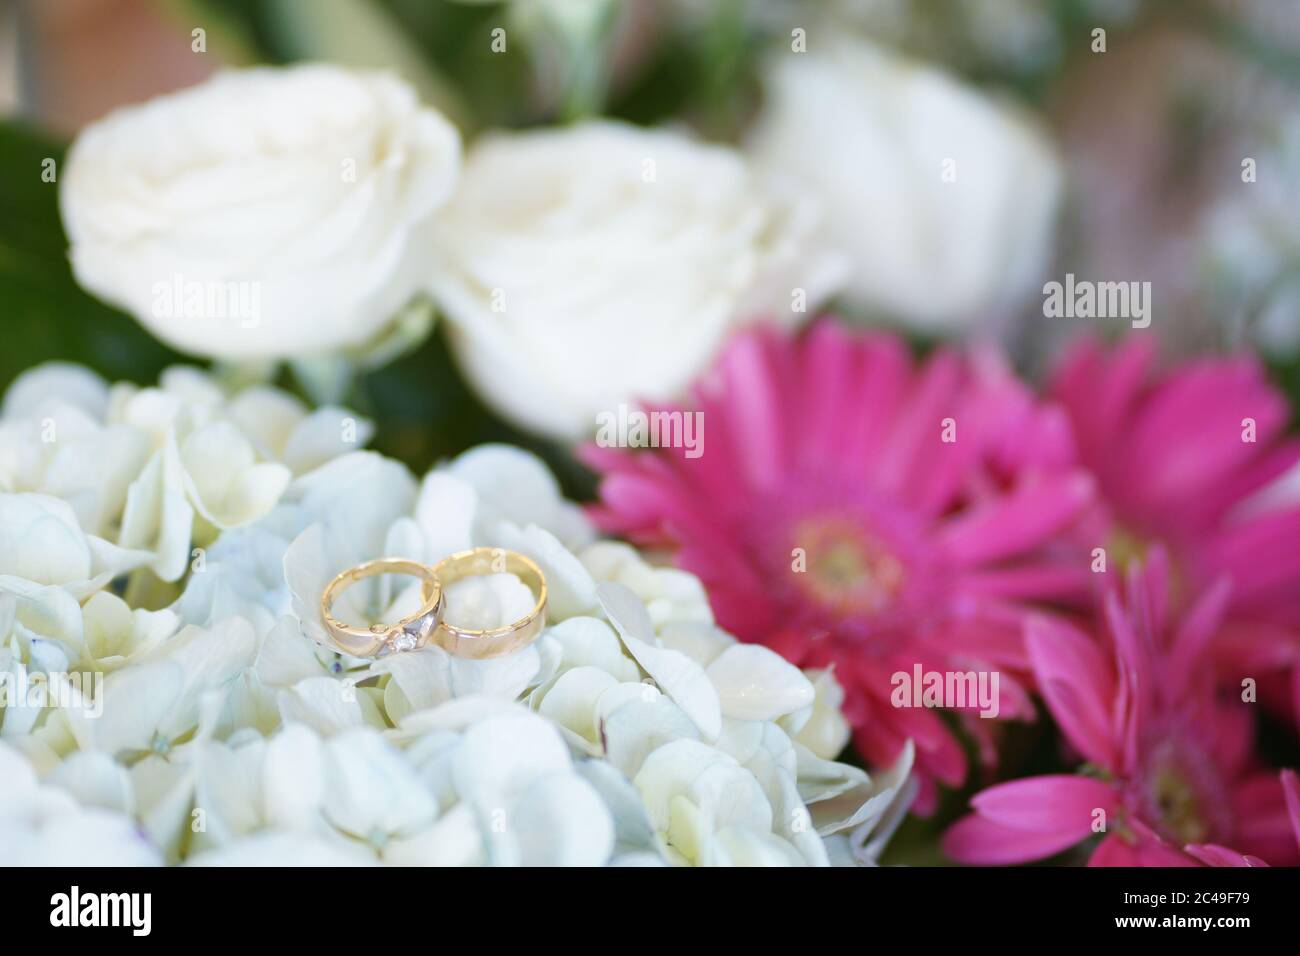 A photo of two wedding rings lay on white beautiful flower, blurred ...